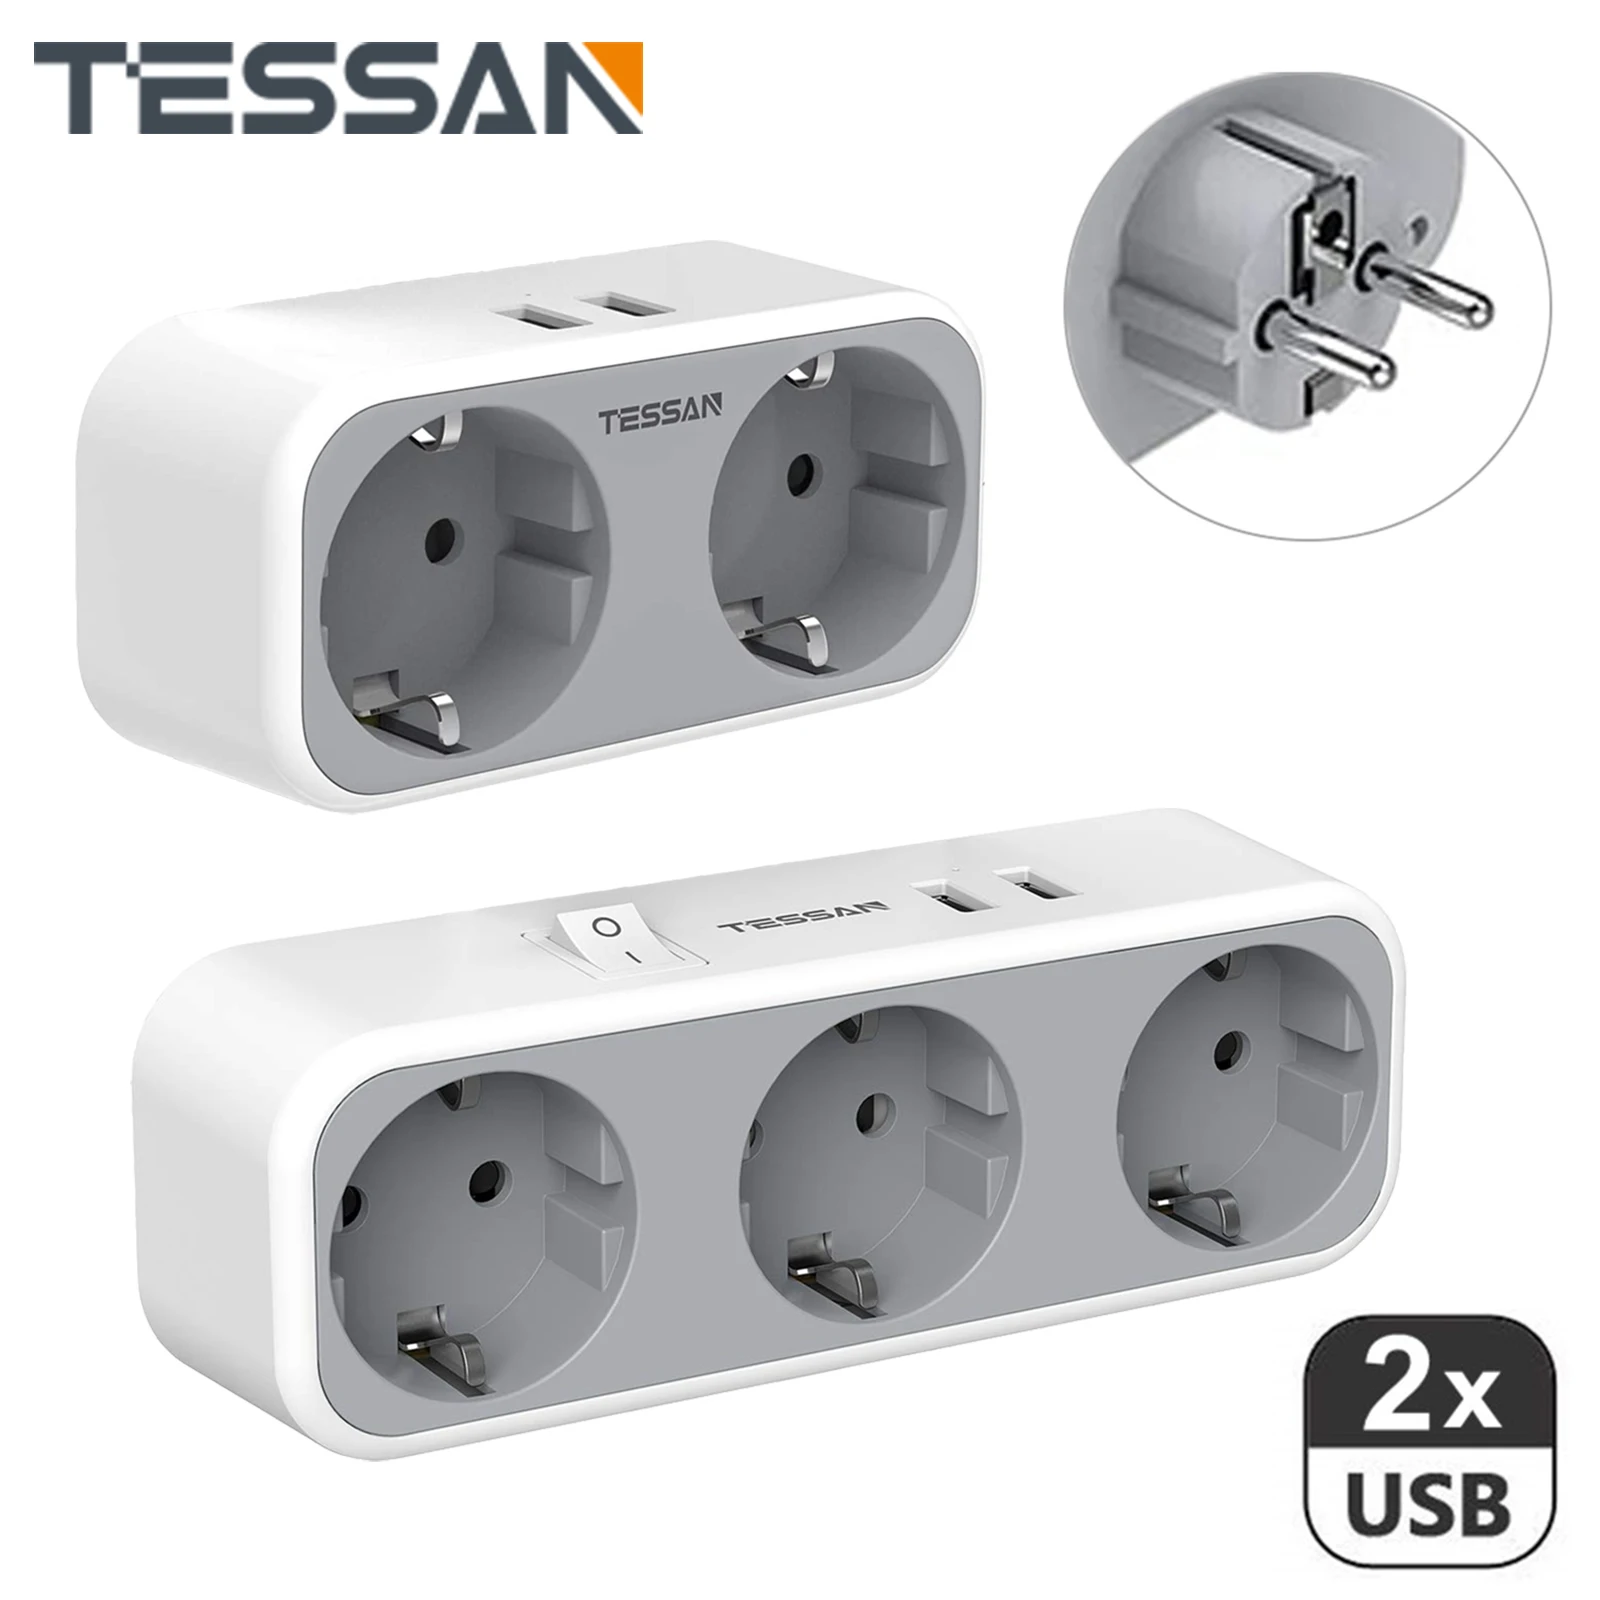 

TESSAN EU USB Socket Adapter with 2/3 AC Outlets & 2 USB Charging Ports, with Multiple Protections, for Smartphone, Tablet, MP3